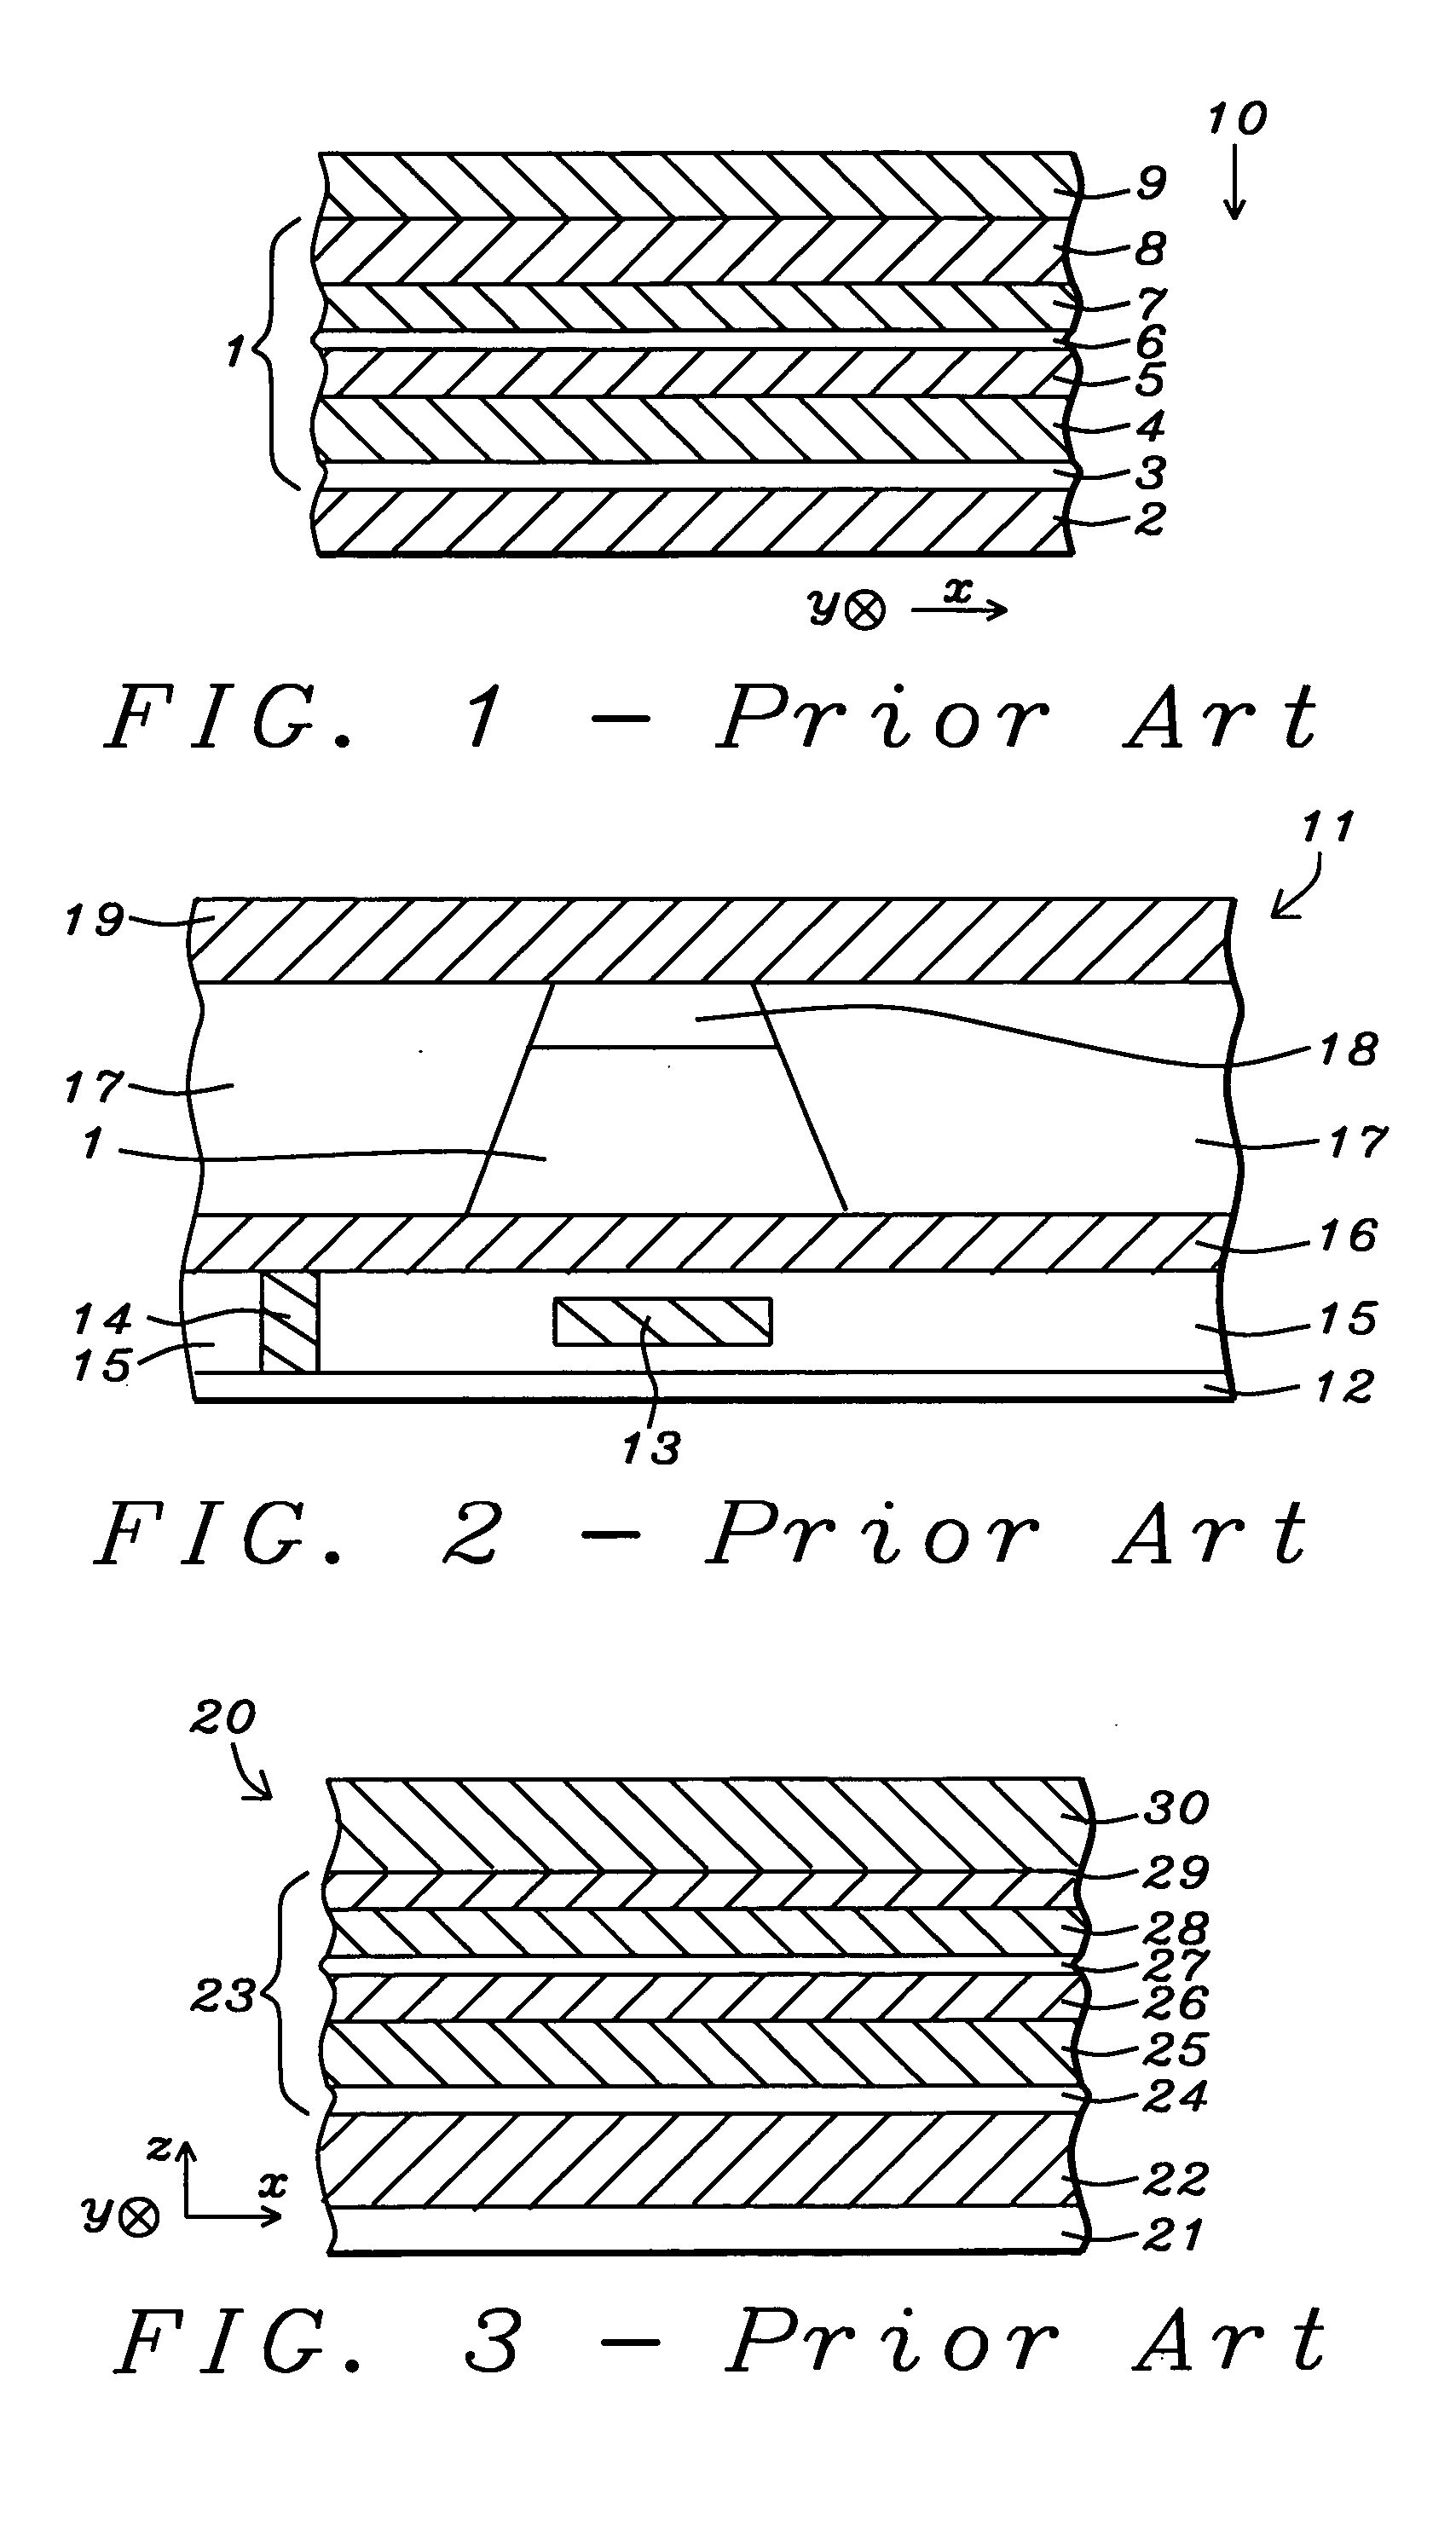 Novel capping structure for enhancing dR/R of the MTJ device